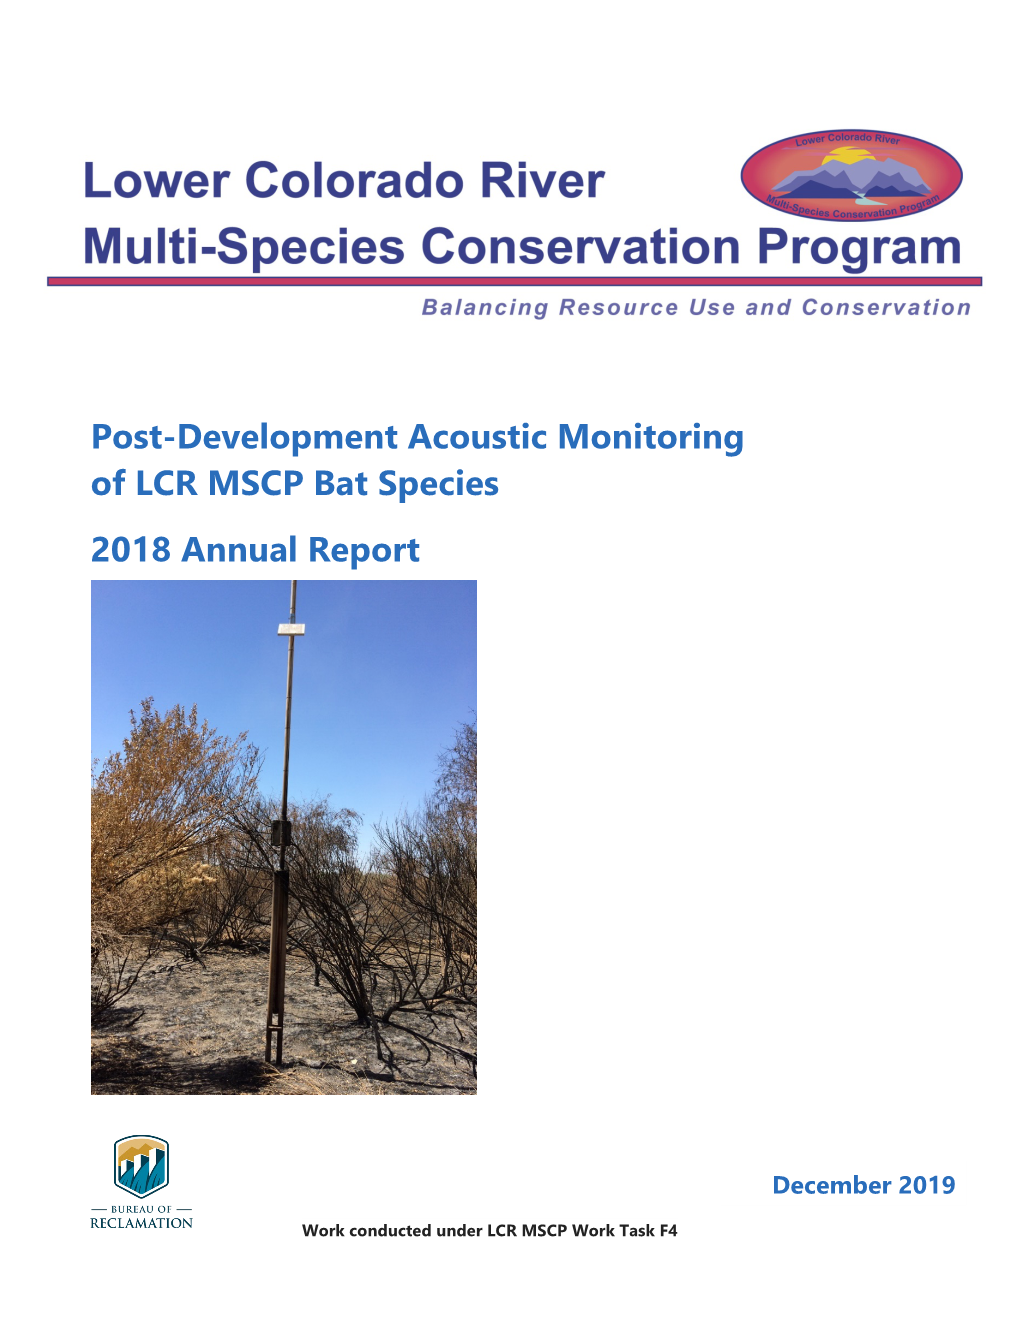 Post-Development Acoustic Monitoring of LCR MSCP Bat Species 2018 Annual Report